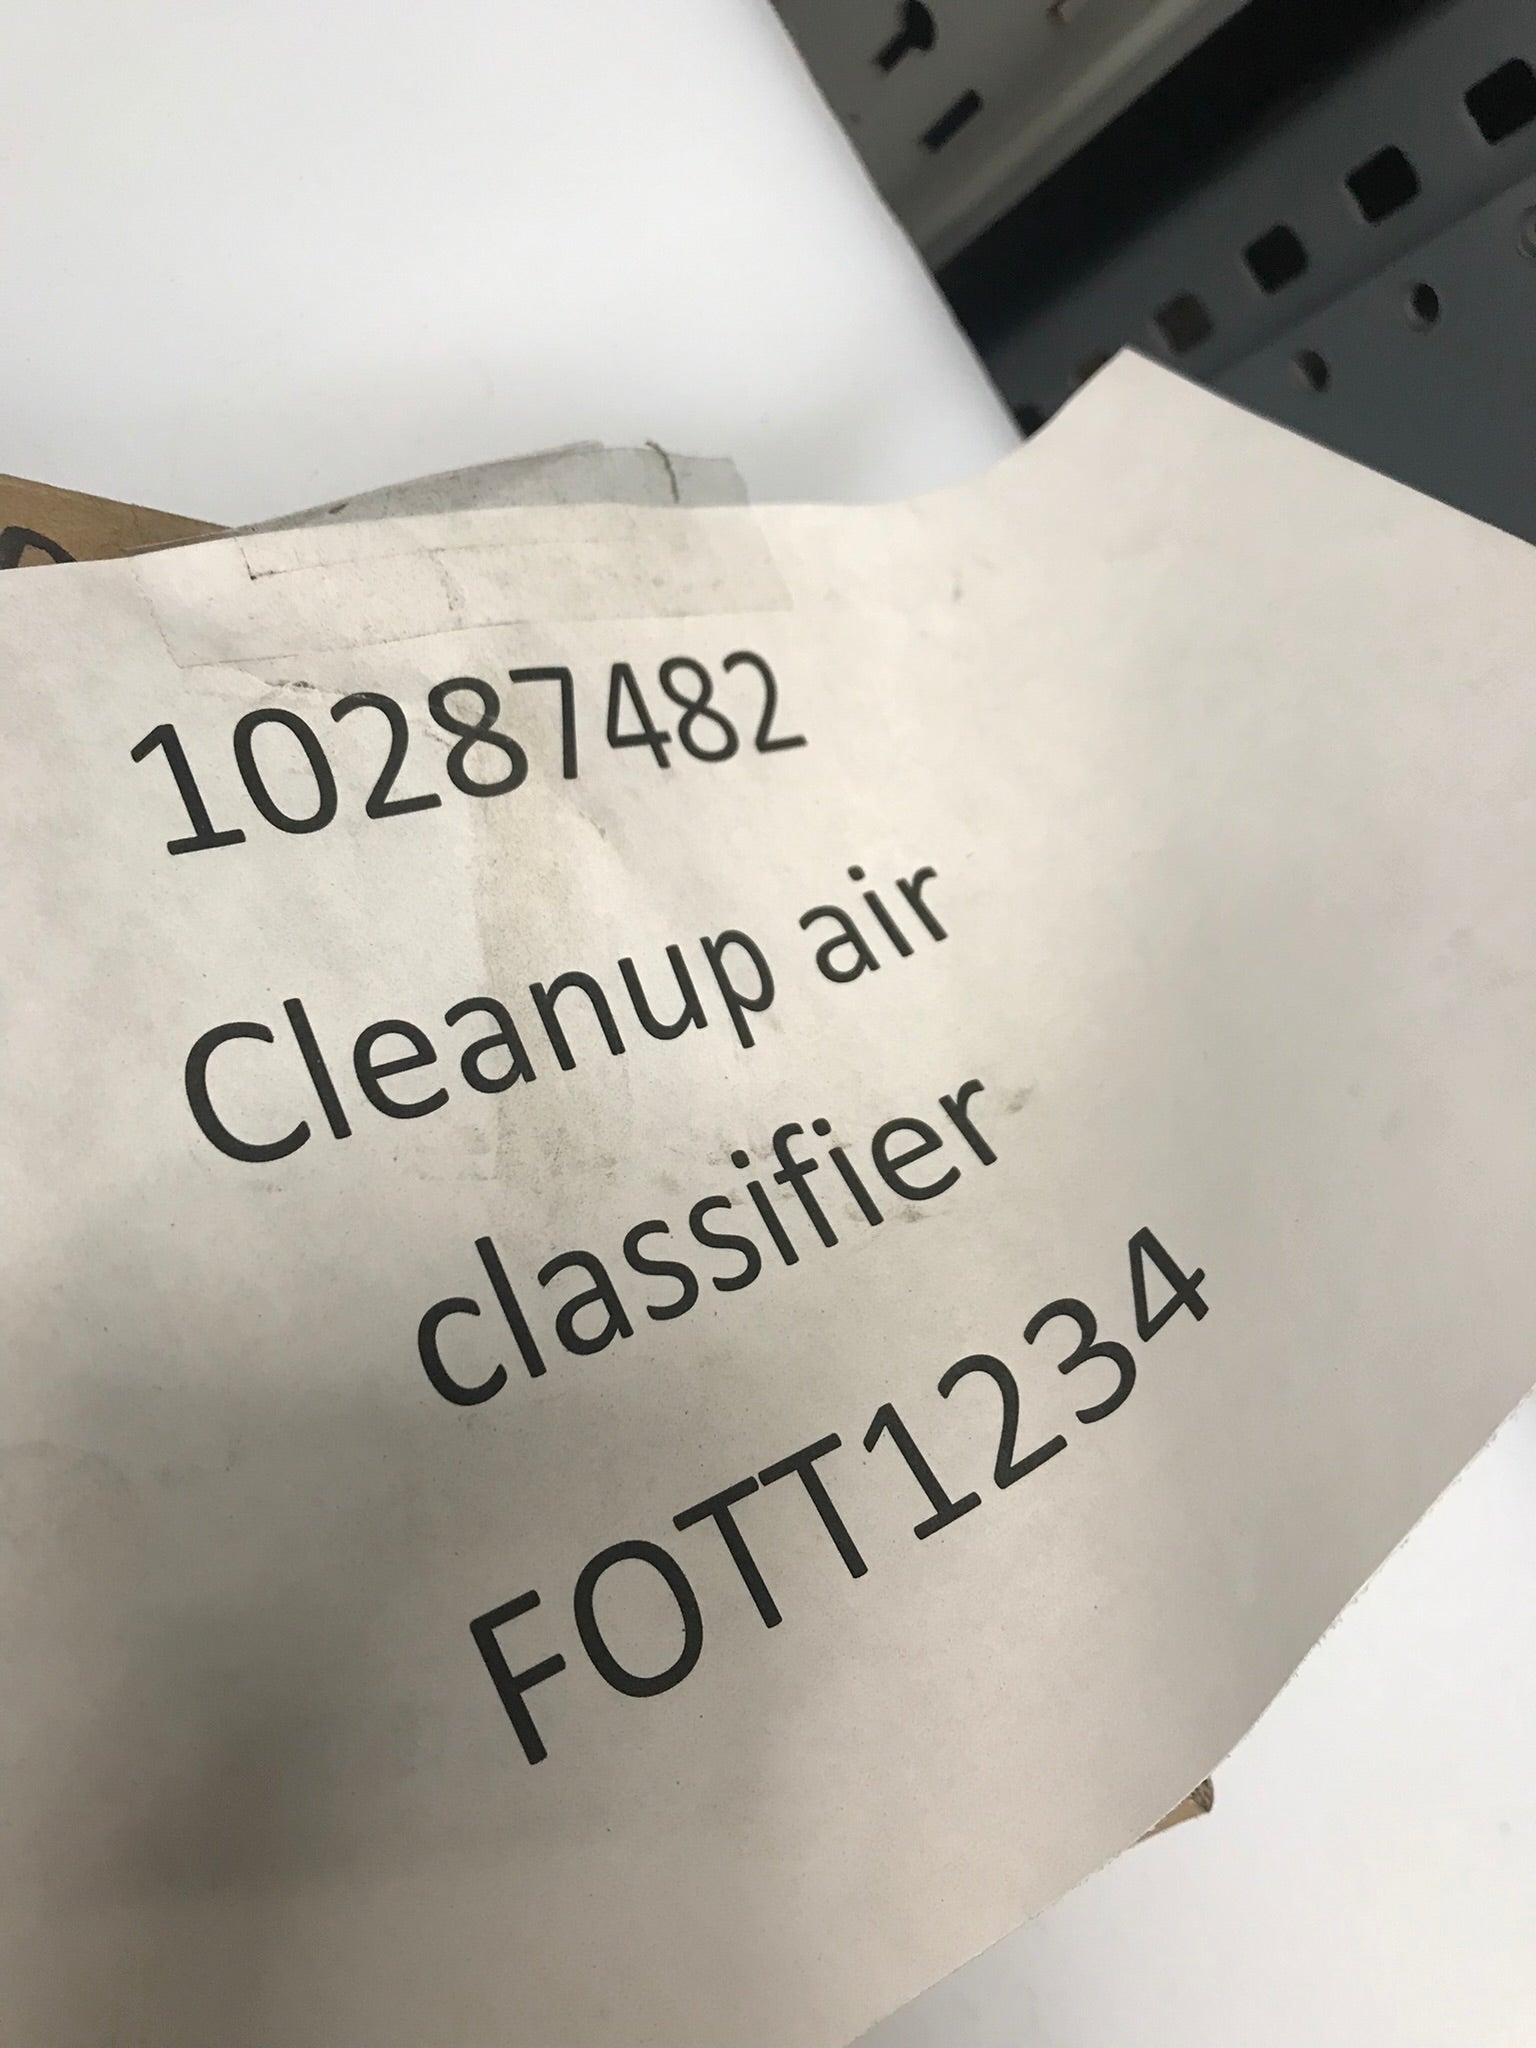 Cleanup air classifier